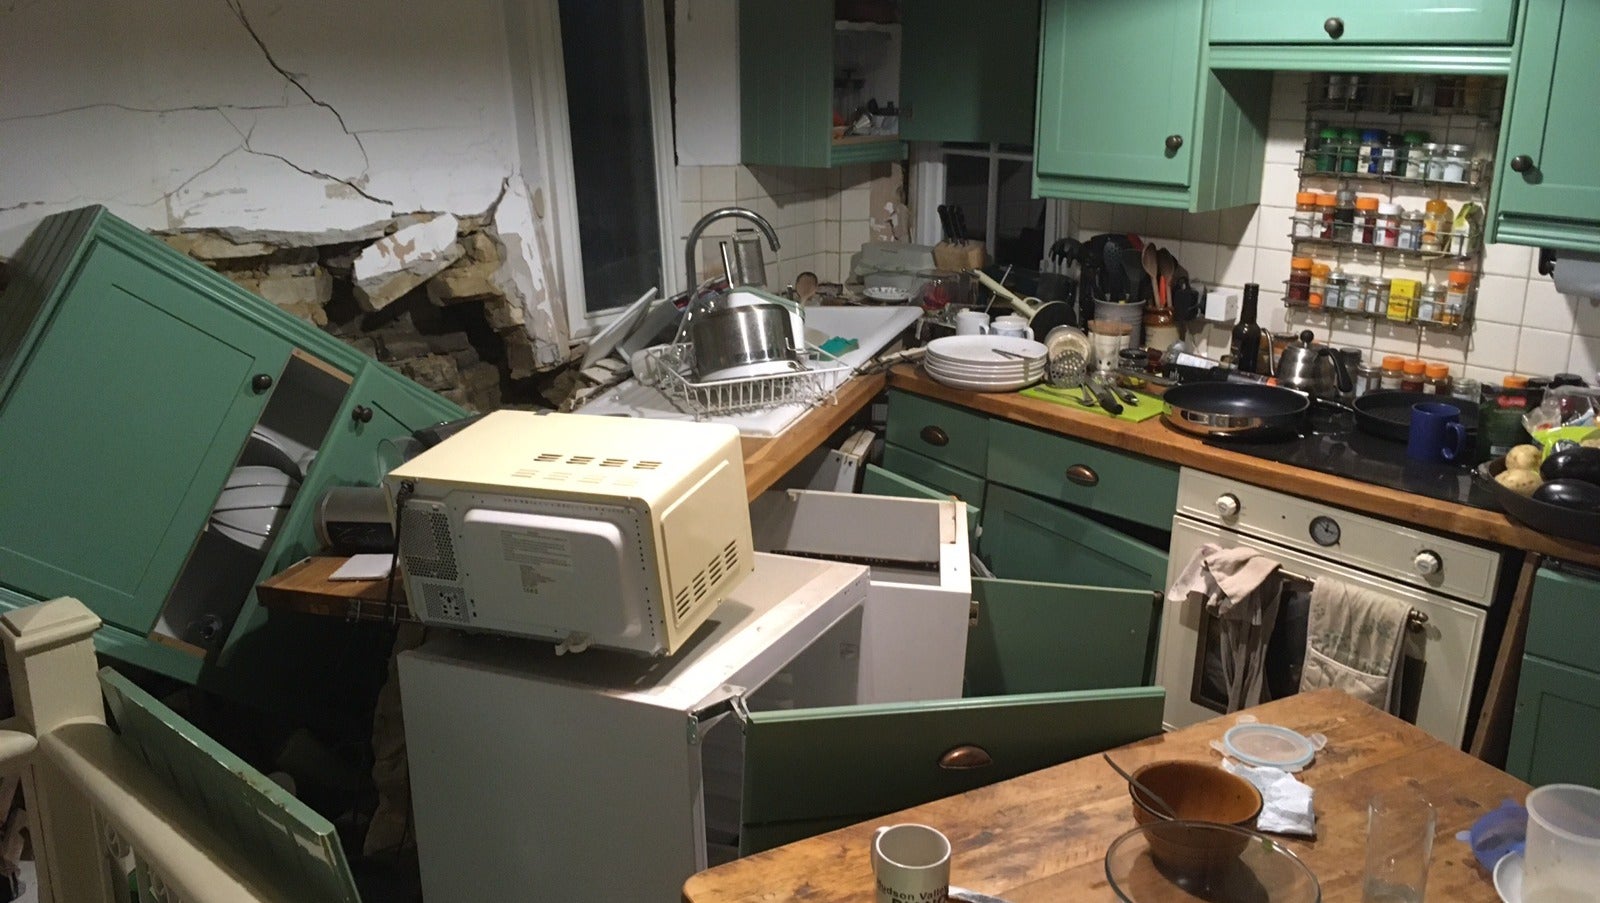 The second car crash completely destroyed the couple’s kitchen